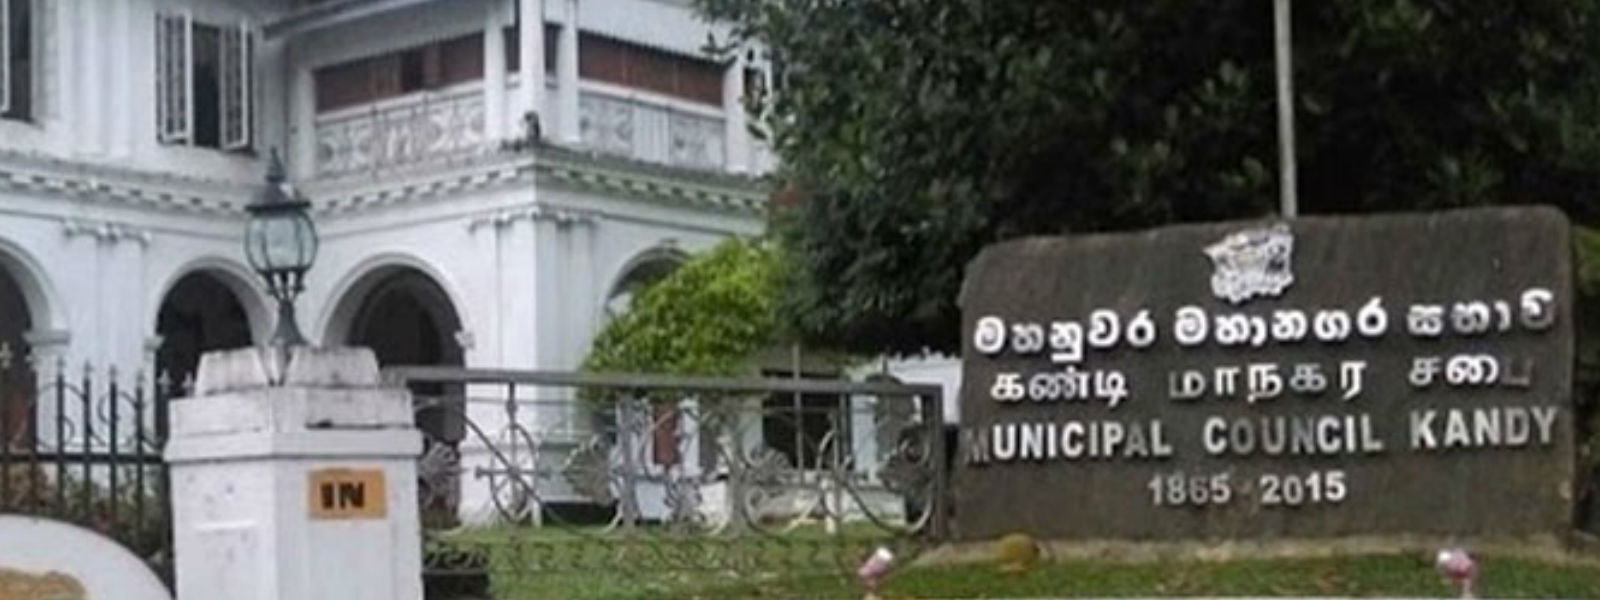 Budget of Kandy MC defeated for a second time